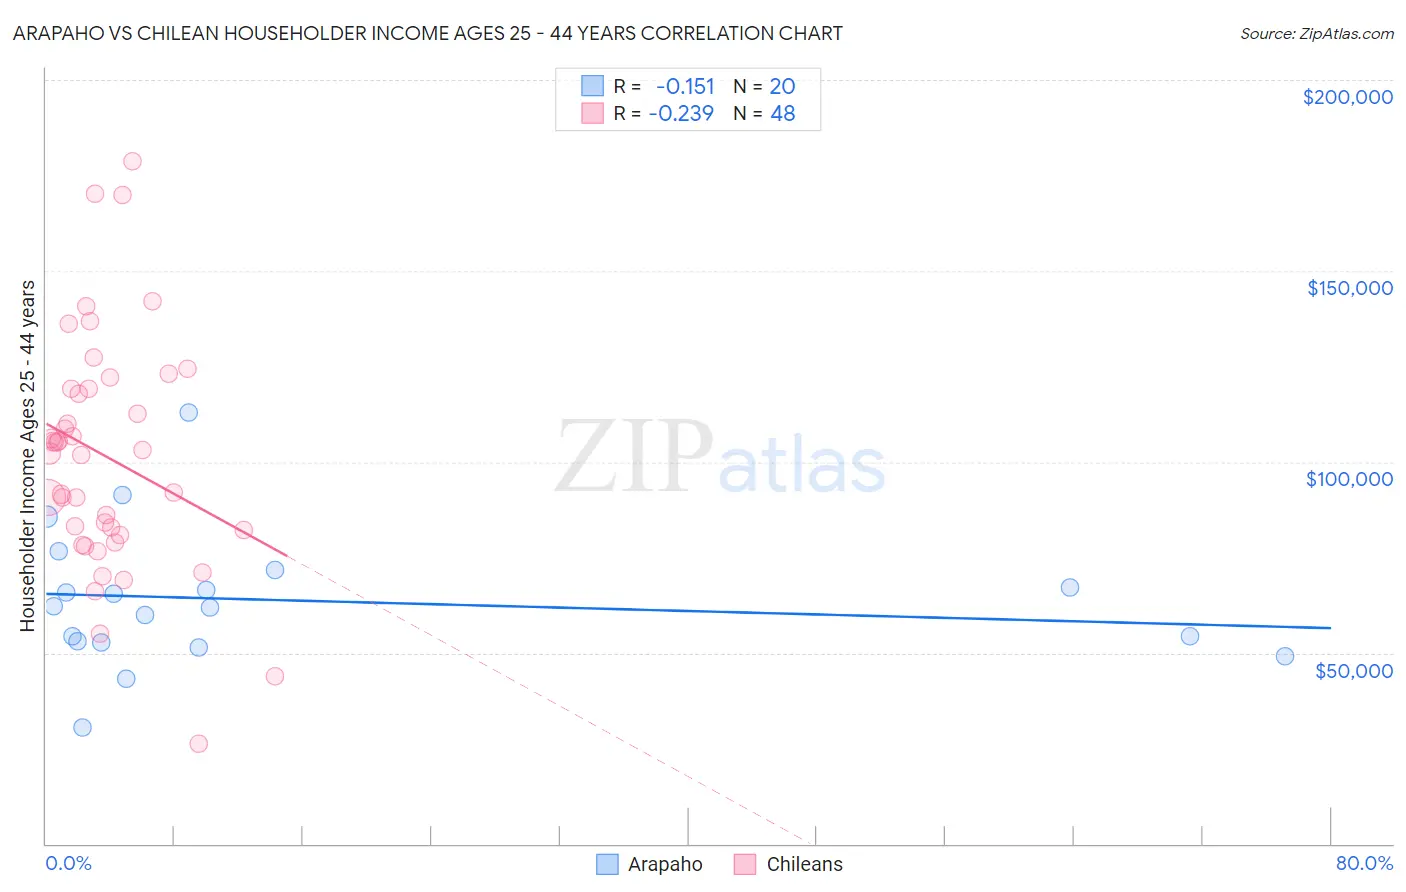 Arapaho vs Chilean Householder Income Ages 25 - 44 years